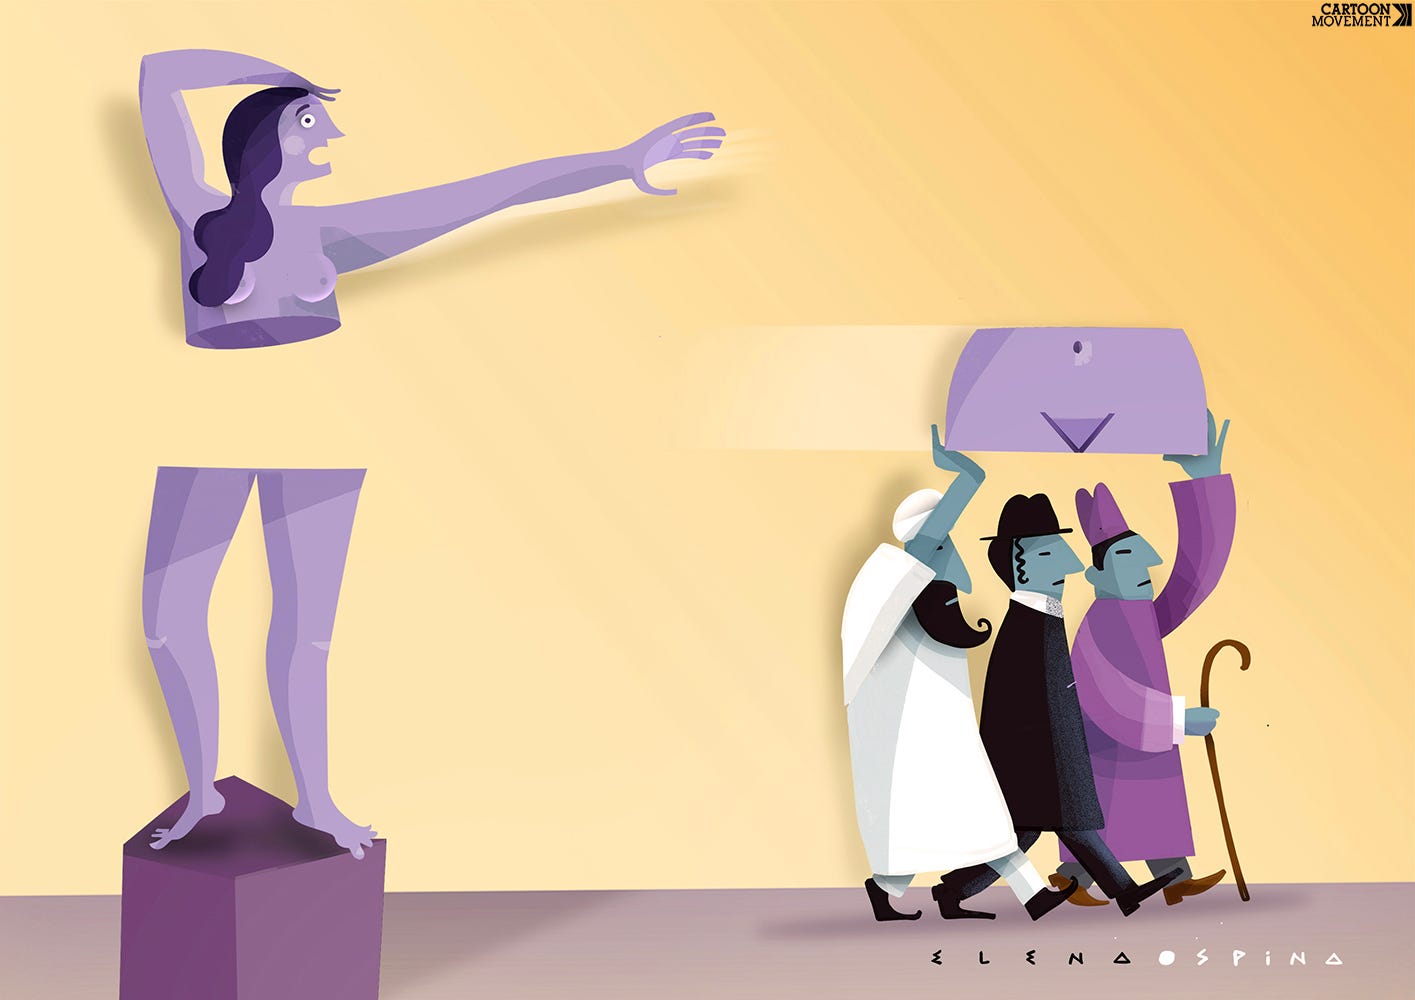 Cartoon showing the representatives of three major religions carrying off the middle part of a statue of a woman (the part containing the genitals), while the female statue exclaims in surprise.